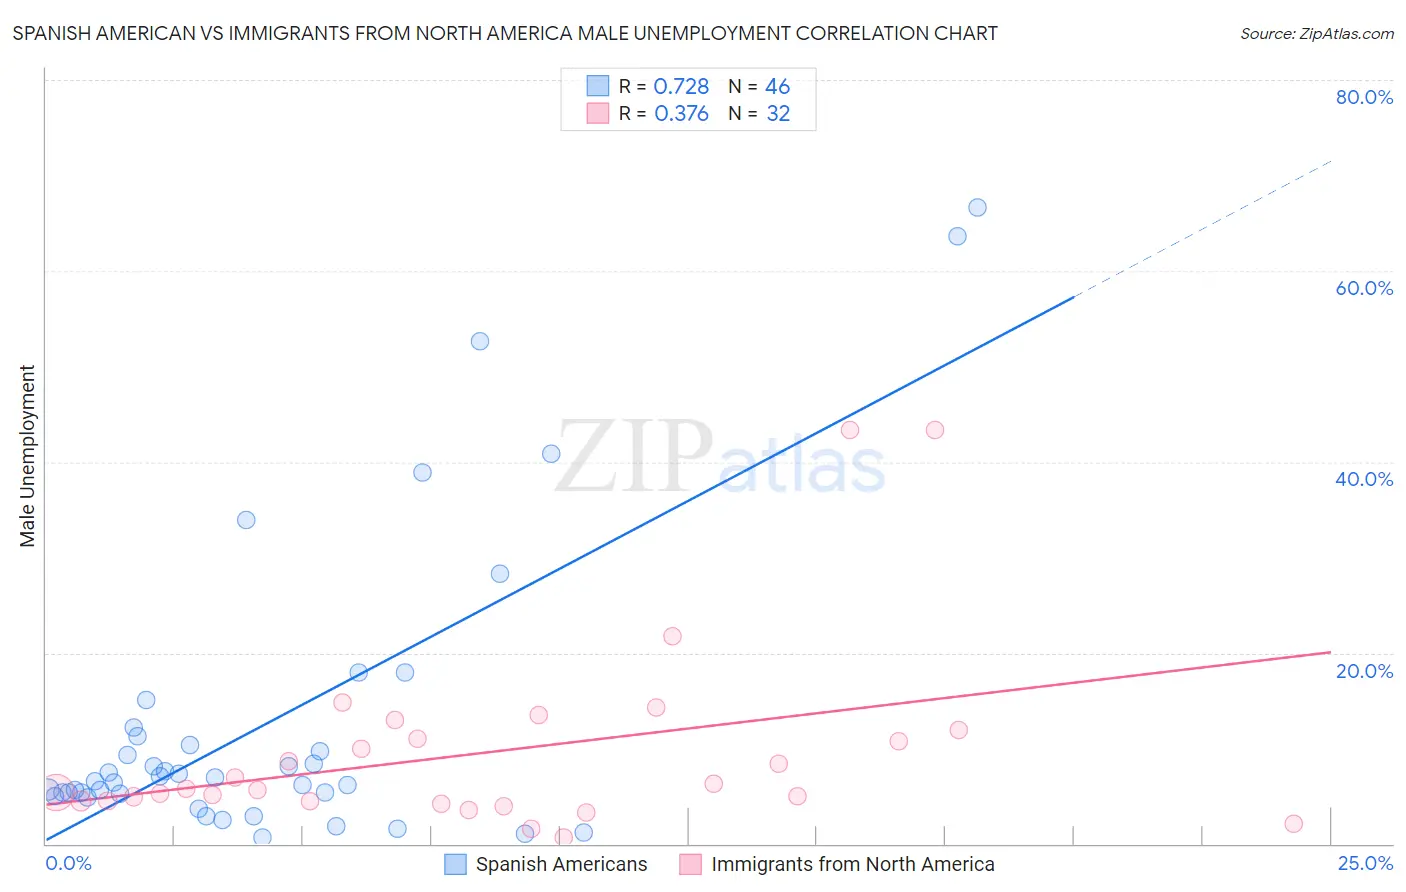 Spanish American vs Immigrants from North America Male Unemployment